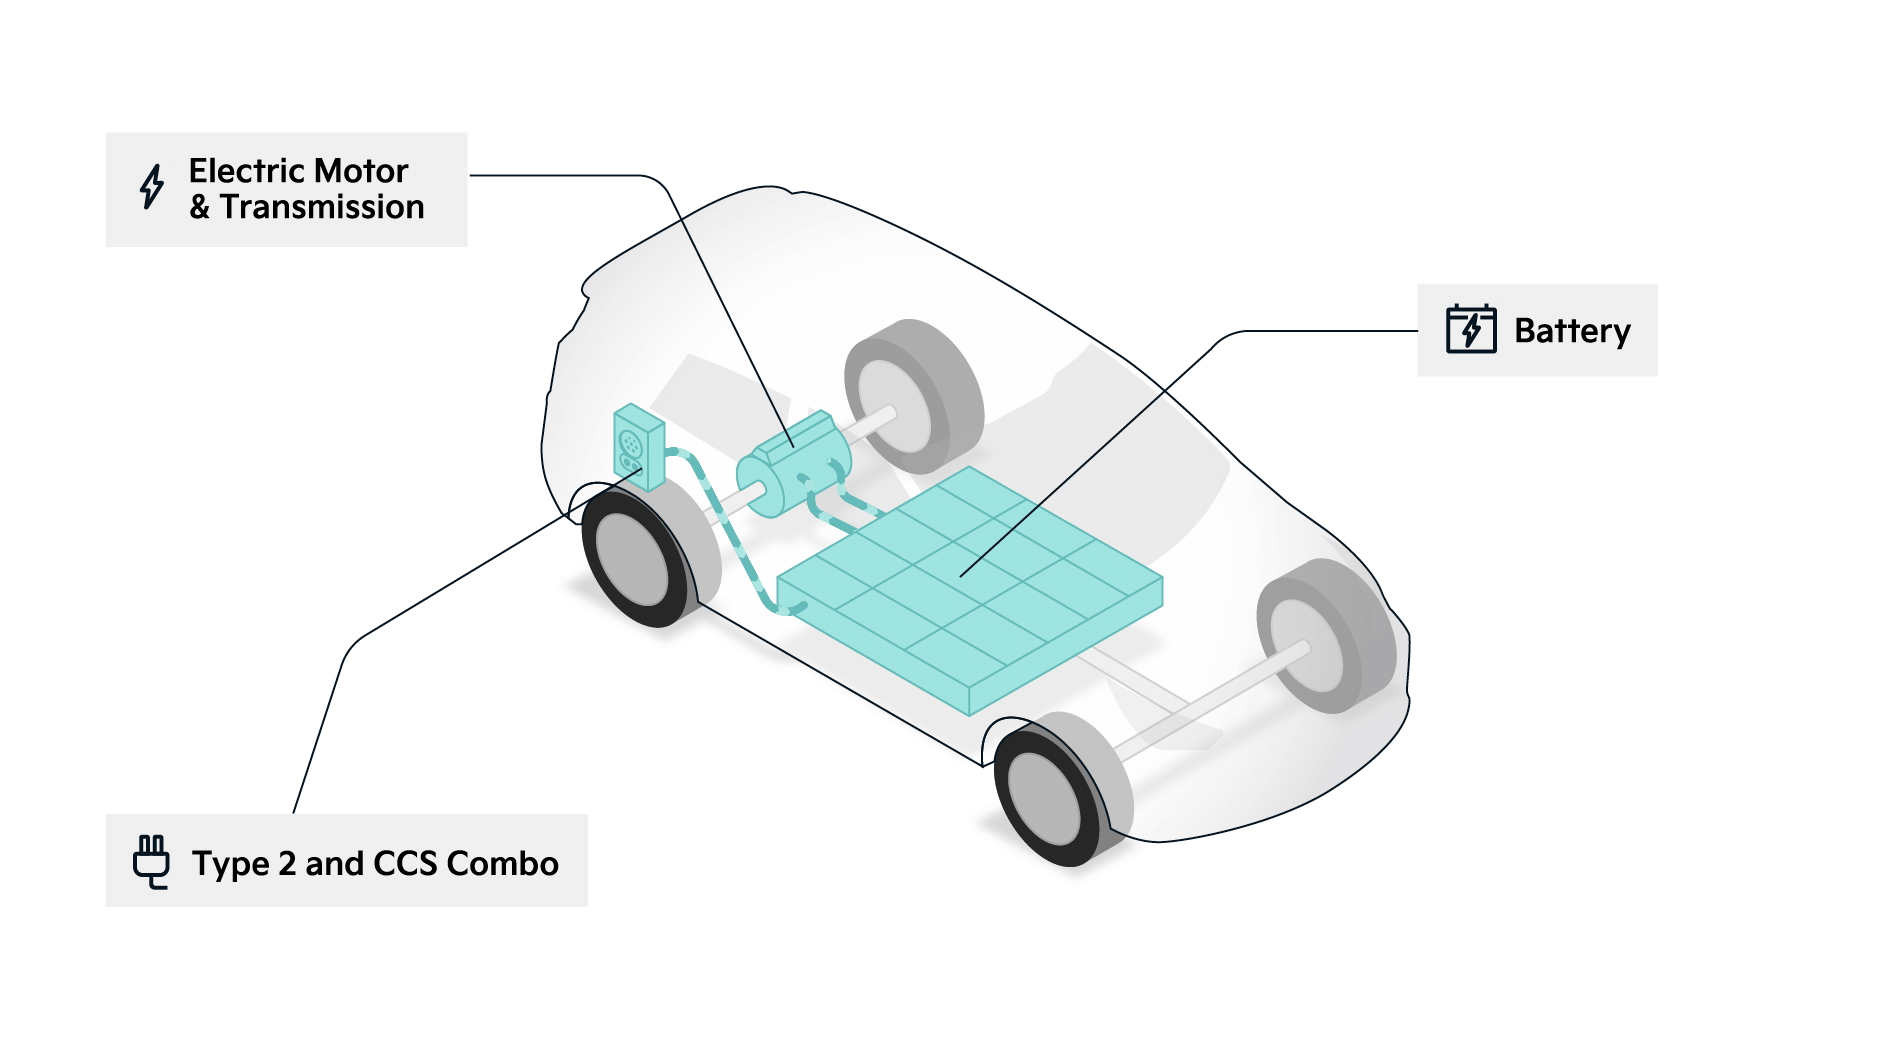 Diagram showing how Electric cars work, with labels for the electric motor, battery and type 2 and CCS Combo.